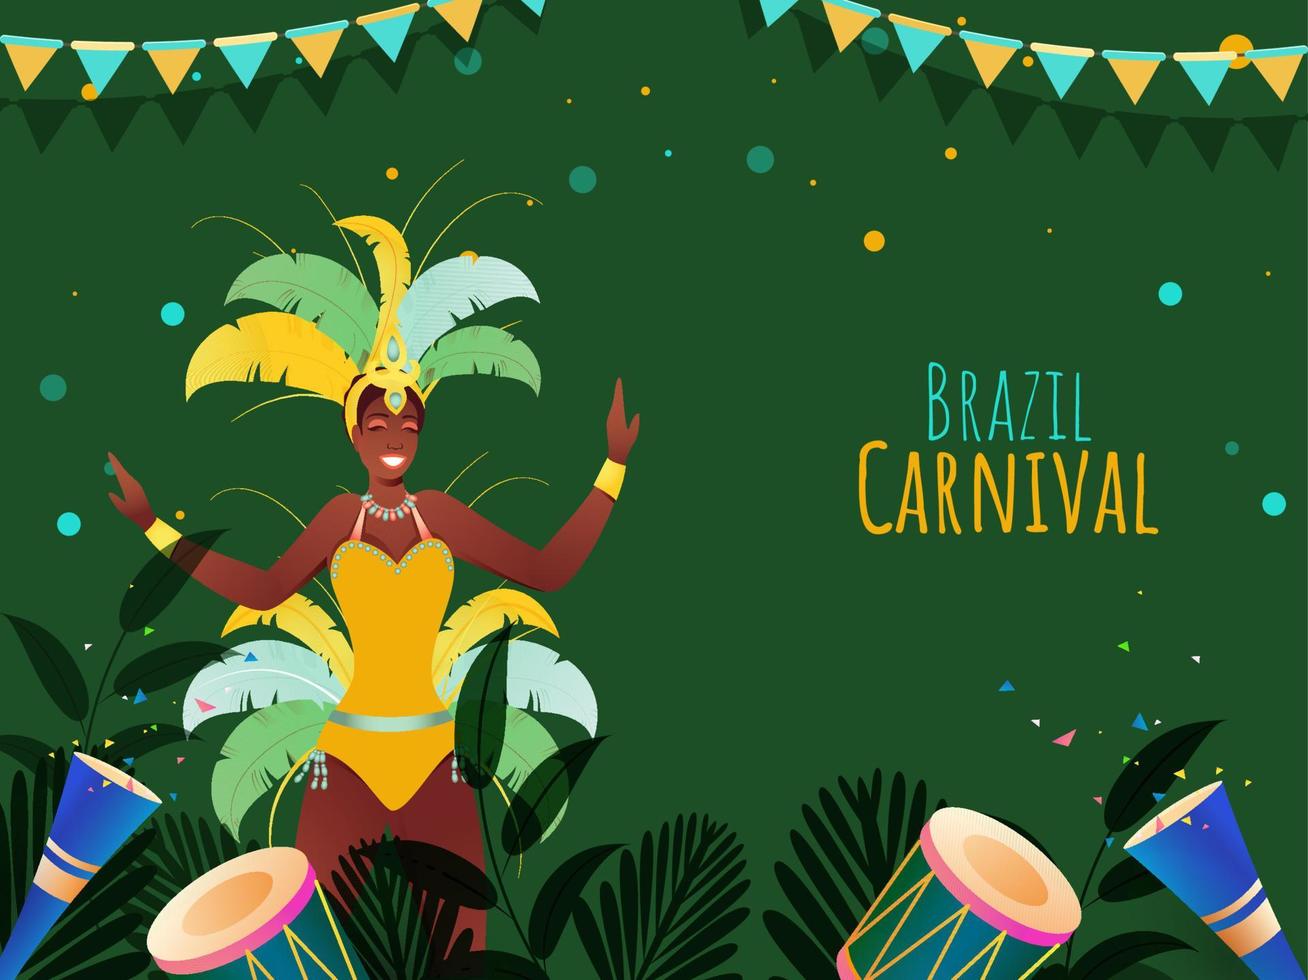 Brazil Carnival Concept With Samba Dancer Character, Drum Instruments, Leafes And Party Popper On Green Background. vector